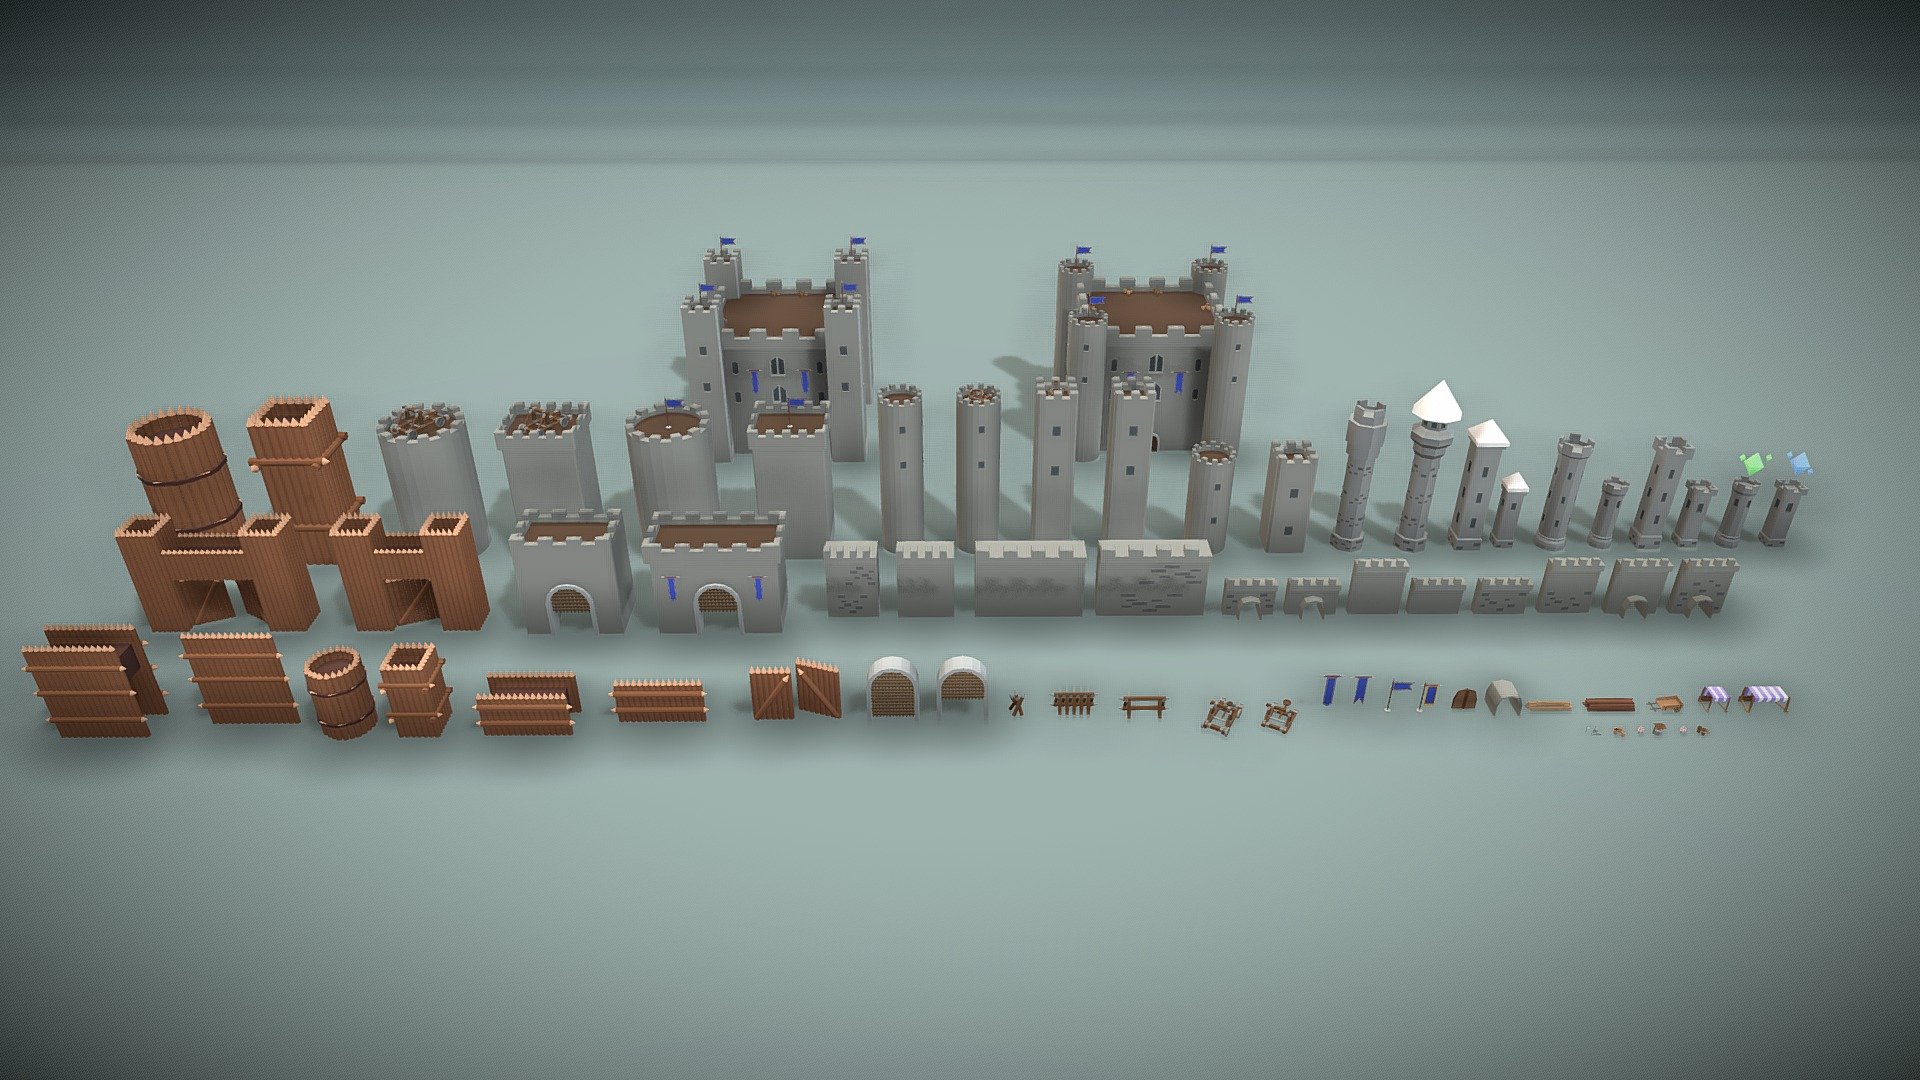 These medieval city assets are modeled in Blender.

The Whole Scene,
Vertices: 112,086
Edges: 210,460
Faces: 101,637
Triangles: 208,508 - Low Poly City Wall Assets - 3D model by Özgün A. Altuntaş (@ozgunanilaltuntas) 3d model